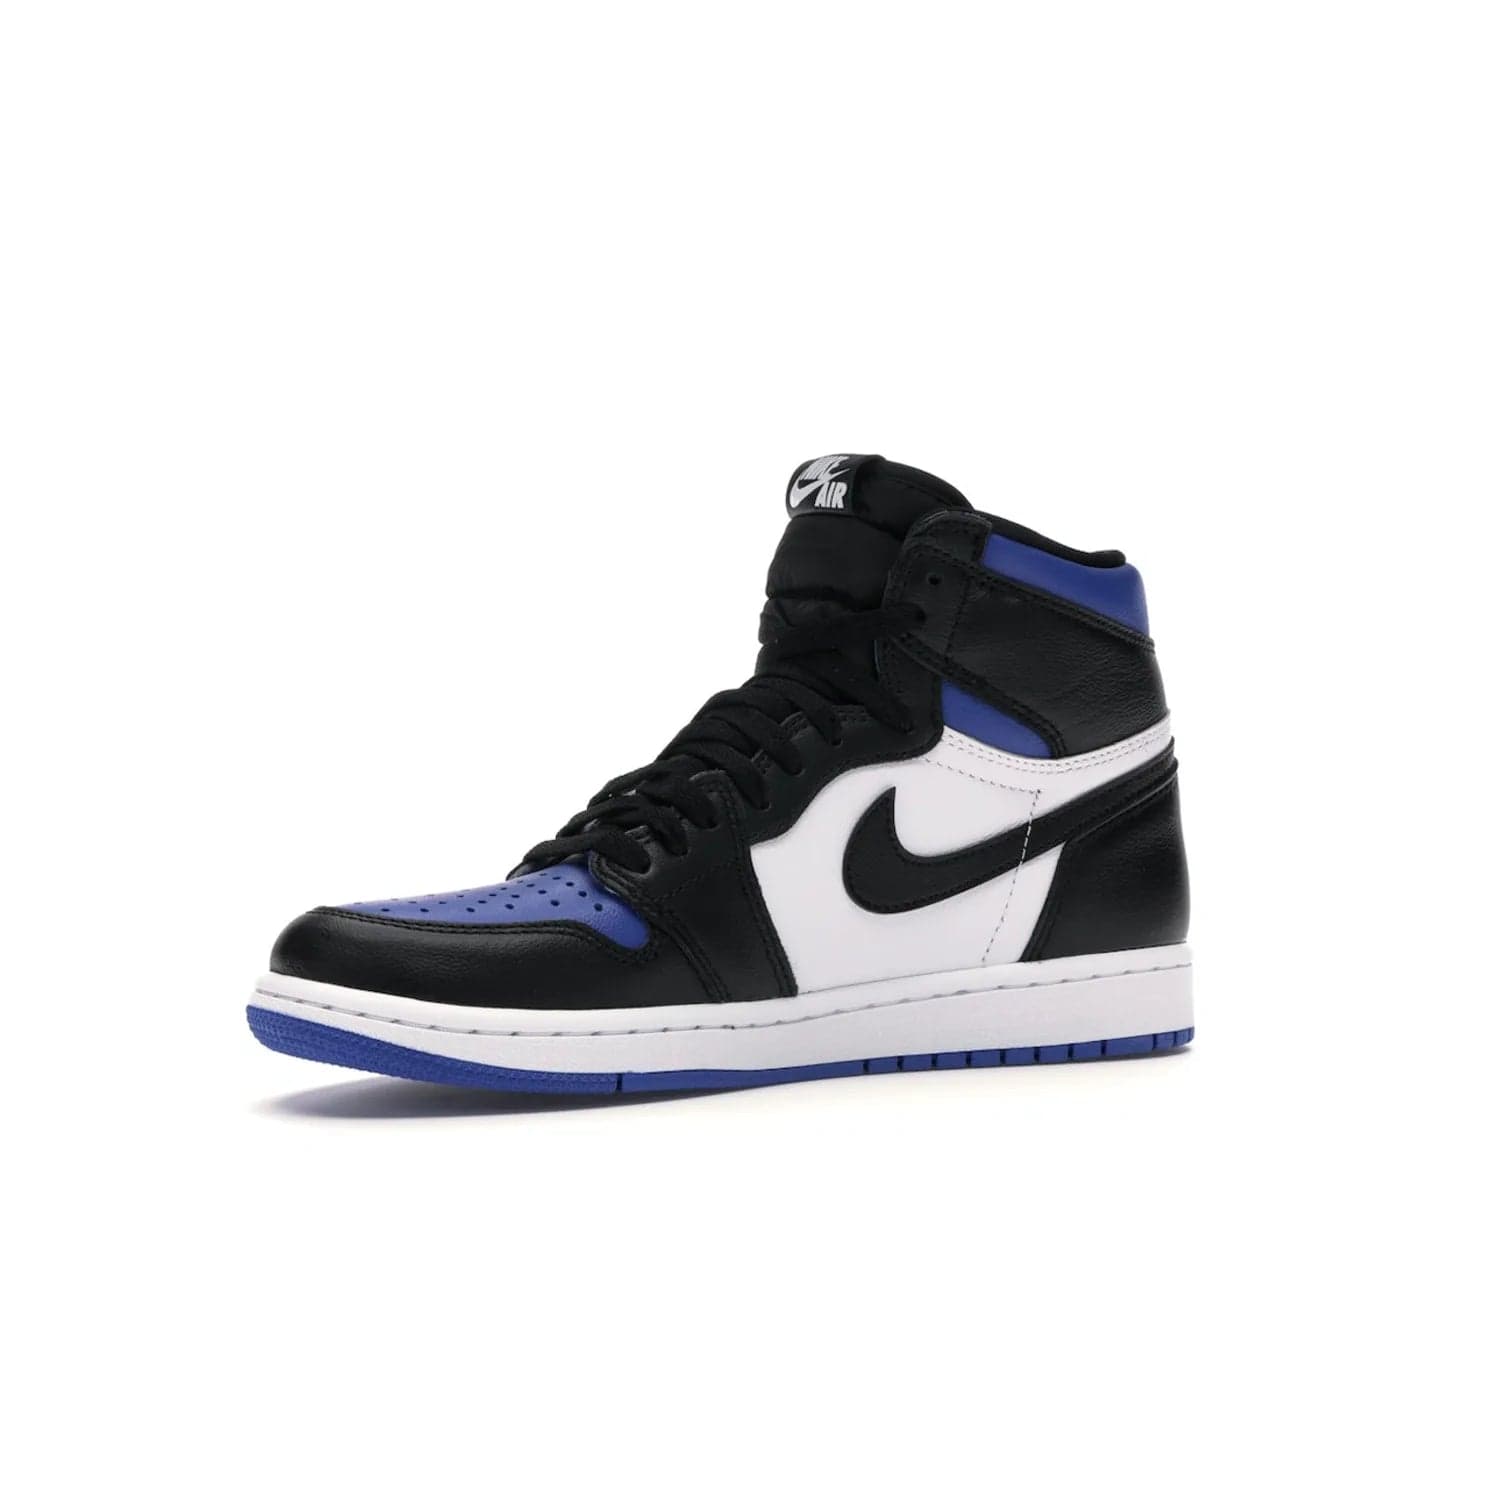 Jordan 1 Retro High Royal Toe - Image 16 - Only at www.BallersClubKickz.com - Refresh your look with the Jordan 1 Retro High Royal Toe. This classic AJ 1 sports a white and royal leather upper, black leather overlays, and branded leather tongue tag. Pick up today and set the streets ablaze.